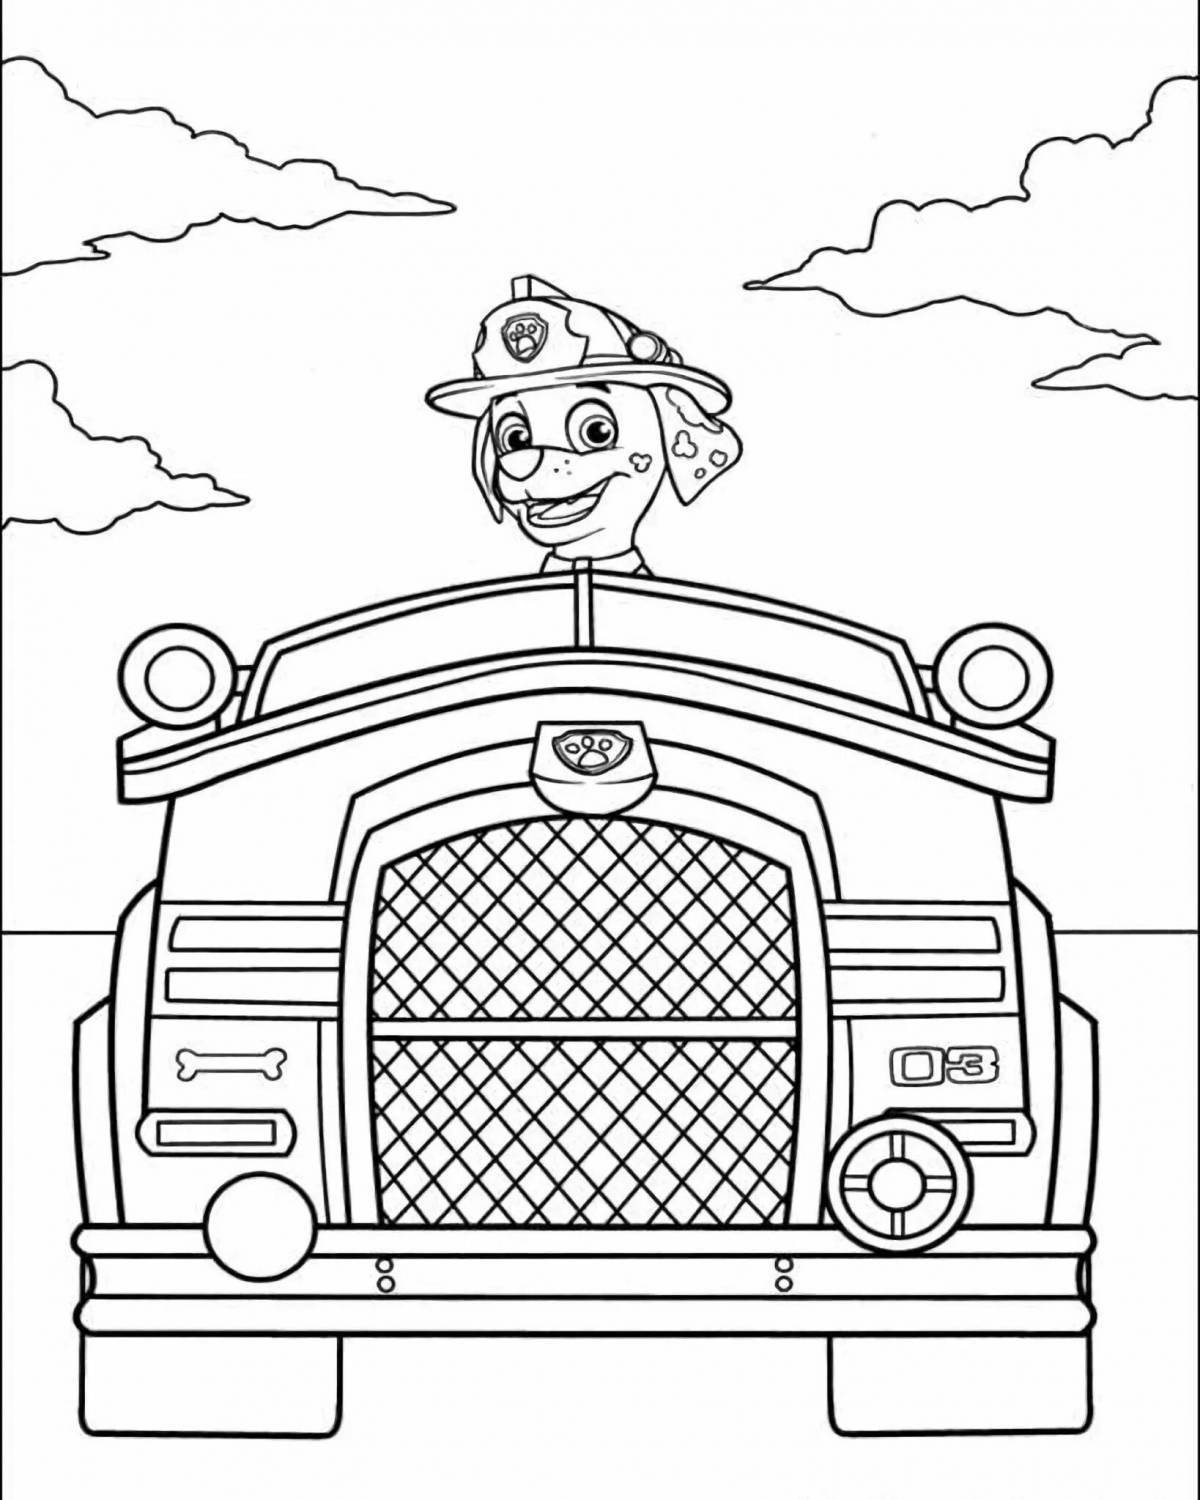 Fun coloring page paw patrol with cars